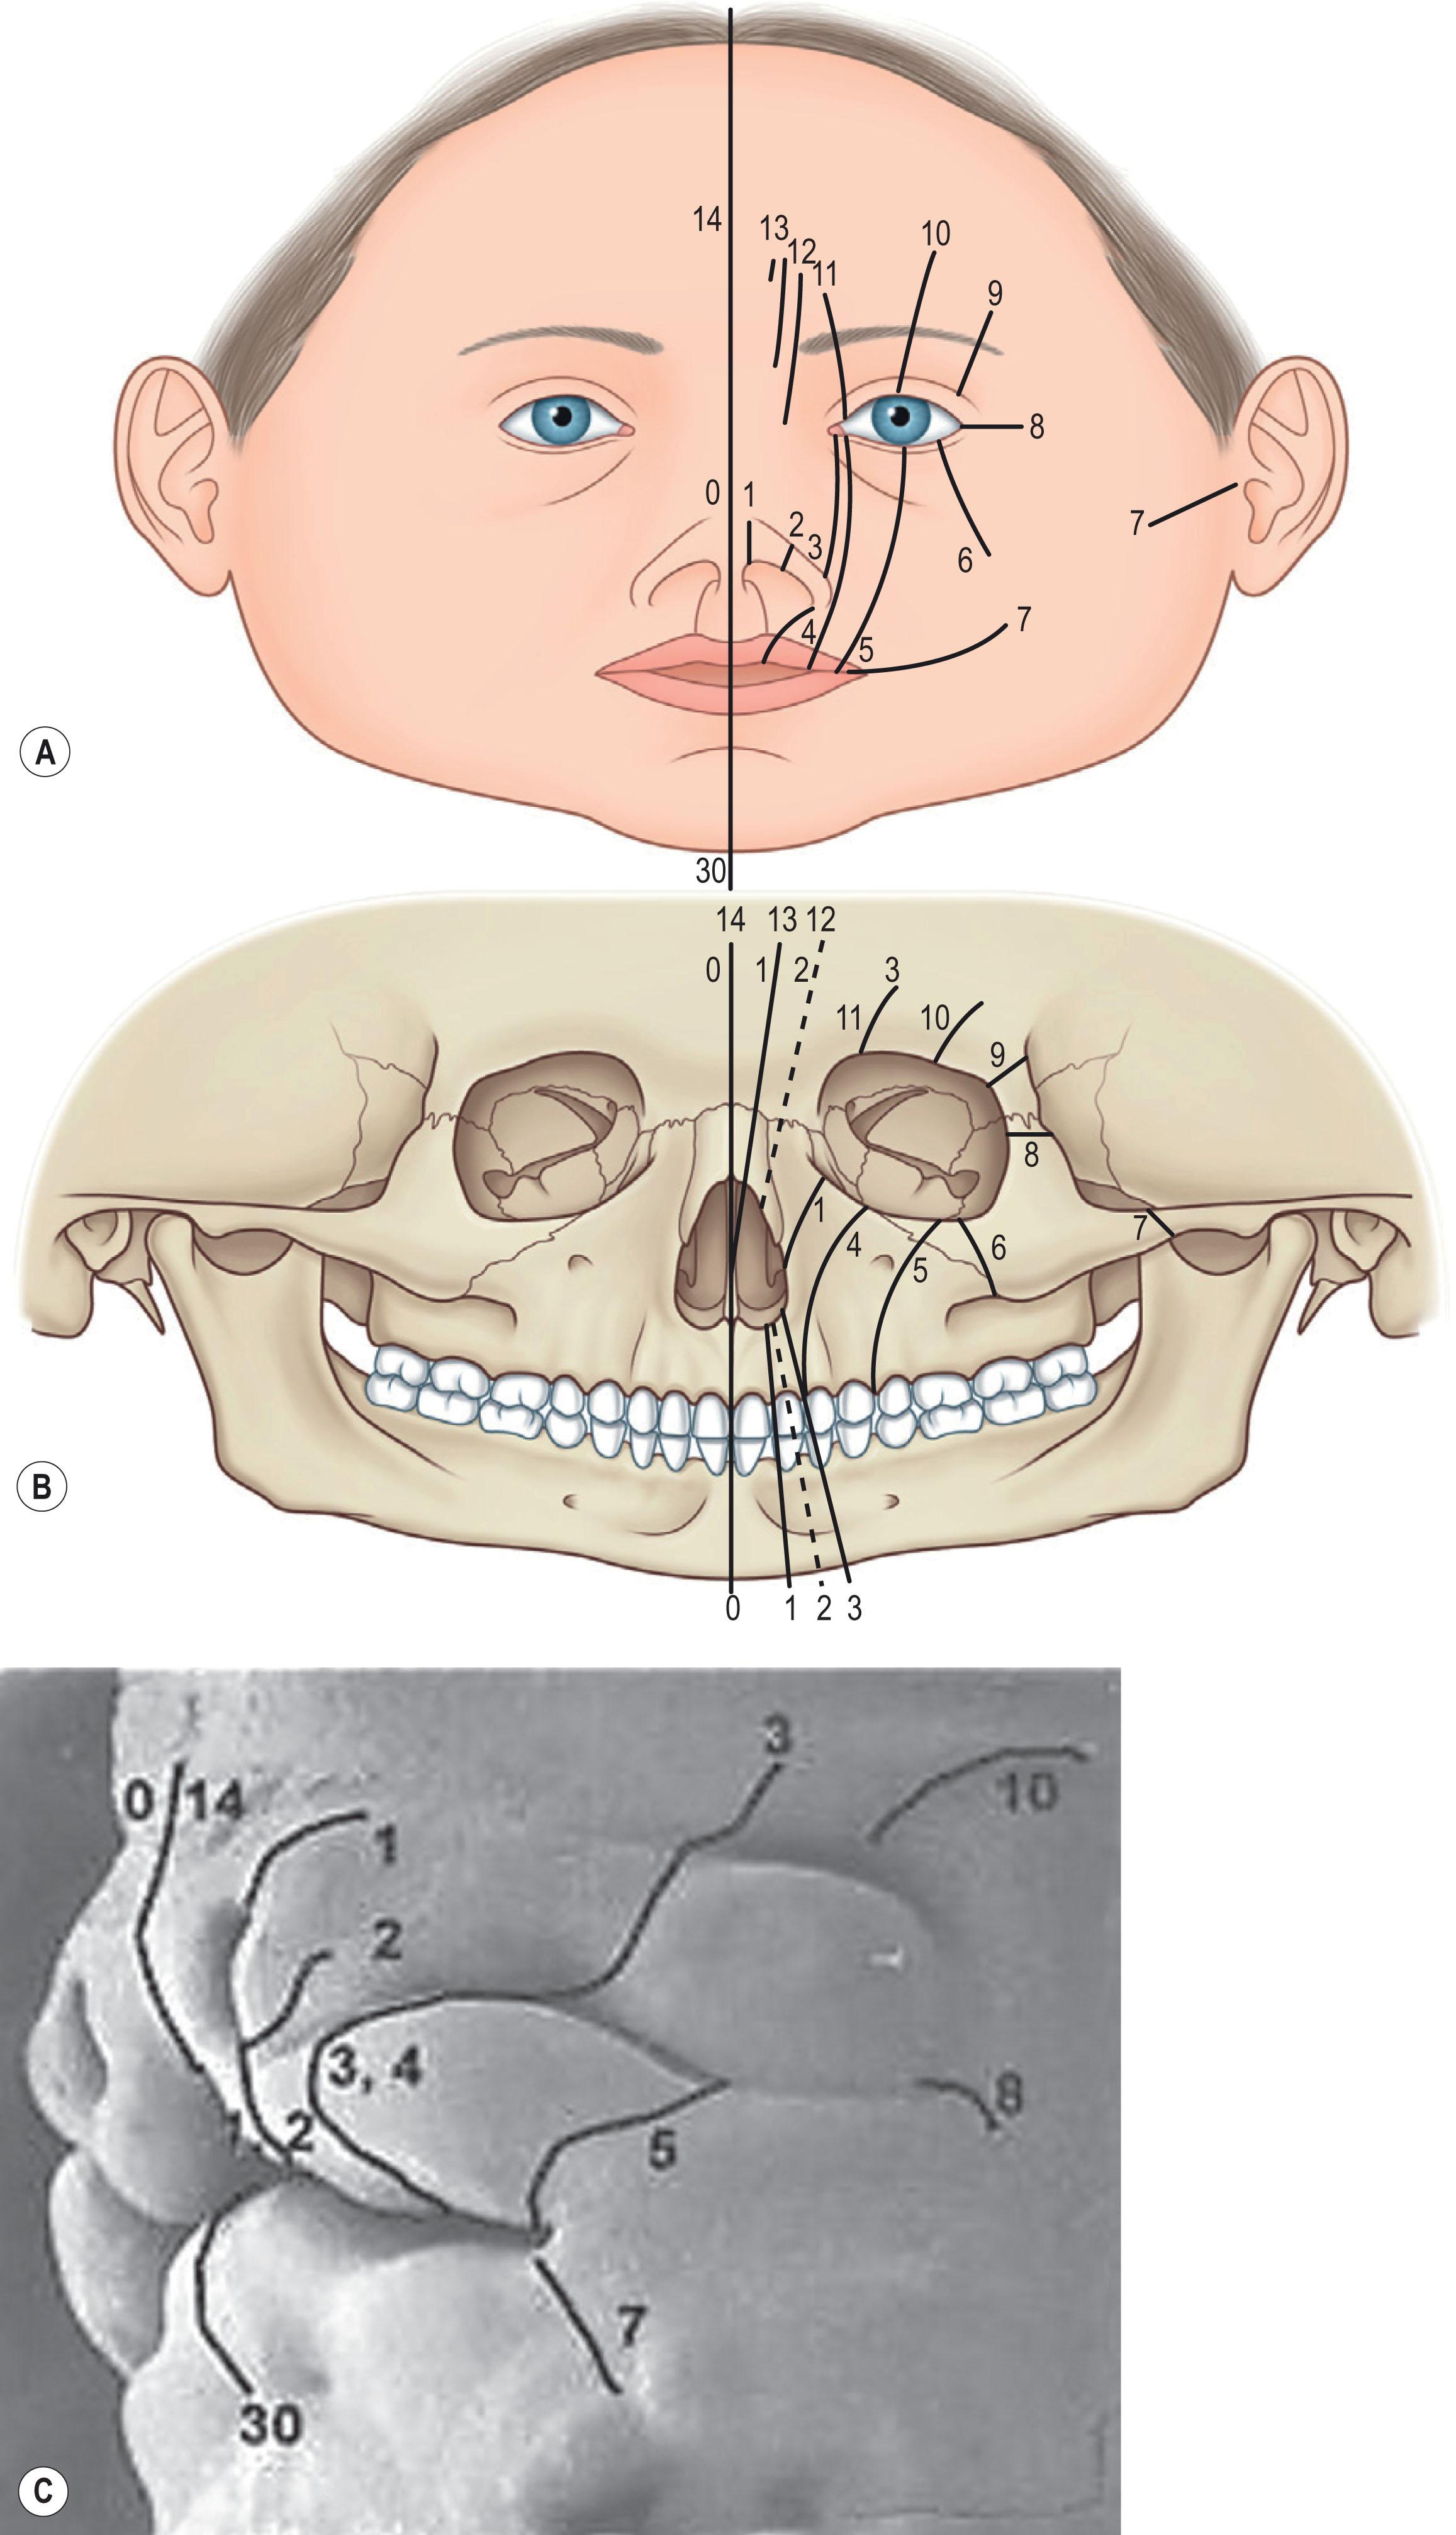 Figure 24.1, Tessier classification of craniofacial clefts. Illustration of Tessier clefts: (A) Soft-tissue landmarks are outlined on the left side of the face (right half of the drawing). (B) Skeletal locations of numeric clefts are depicted on the left side of the face (right half of the drawing). Facial clefts are numbers 0 through 7 and cranial clefts are numbers 8 through 14. Mandibular midline facial cleft is number 30. (C) Embryology correlation to Tessier facial clefts: Tessier-numbered craniofacial clefts are shown correlating with growth center junctions in this 45-day-old fetus.